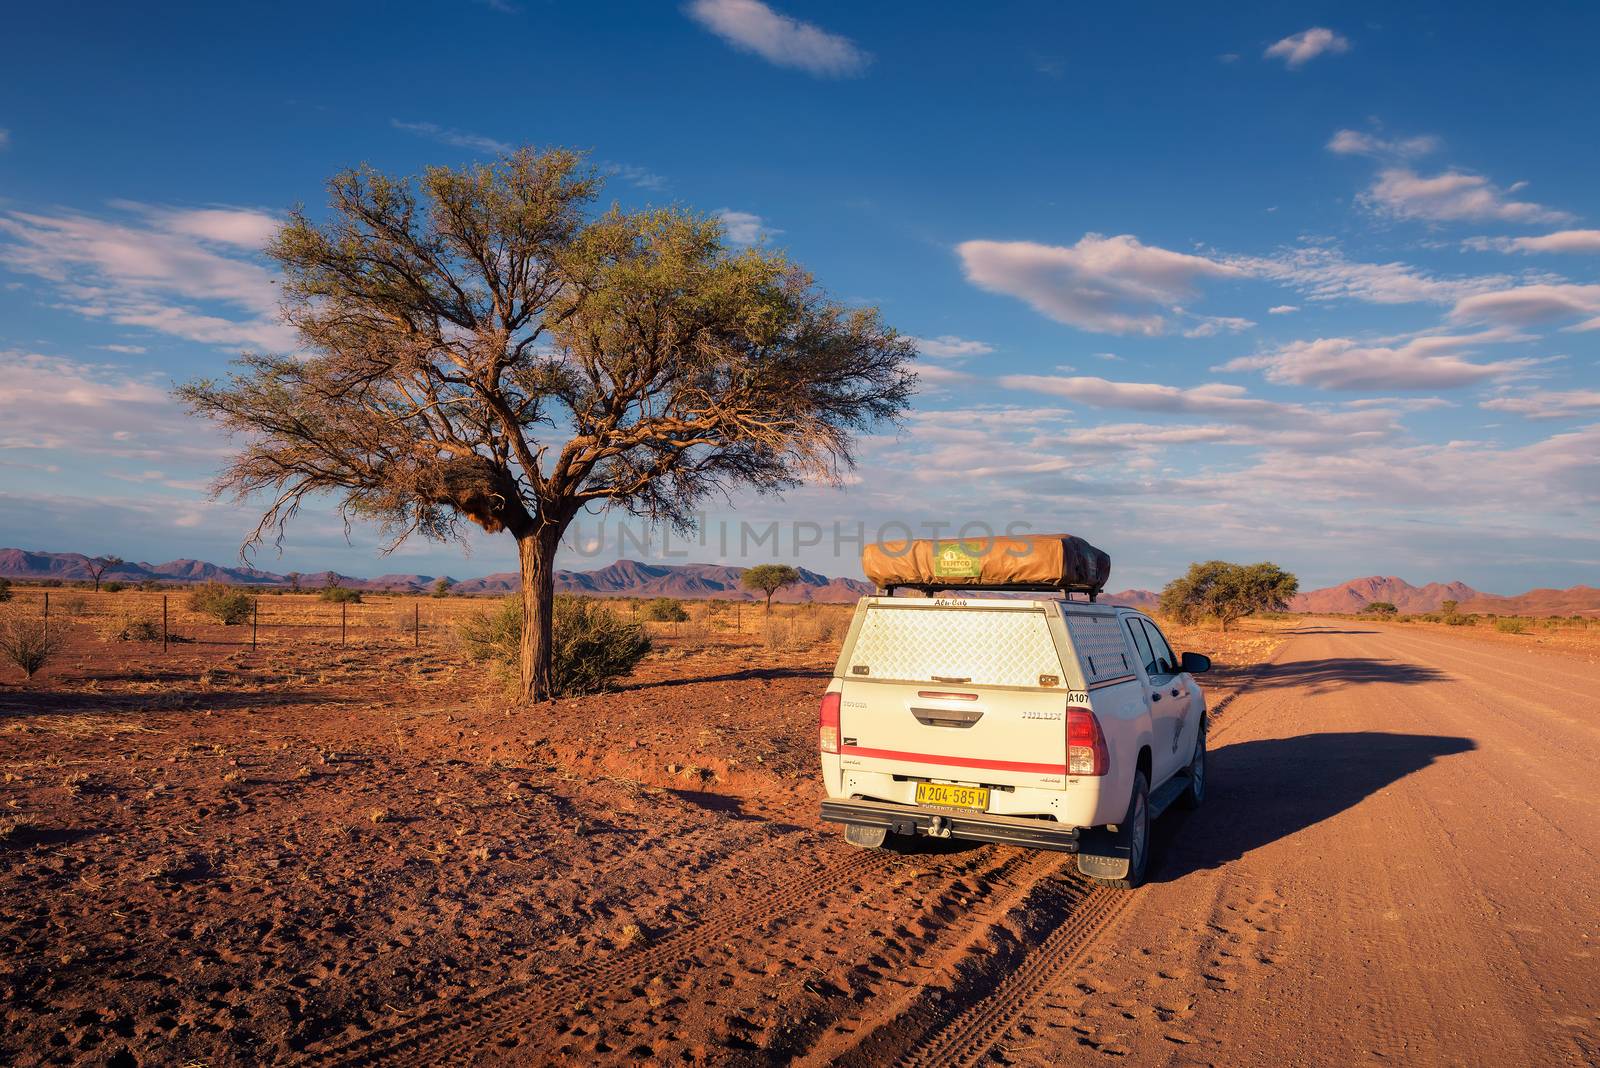 Karas, Namibia - March 30, 2019: Typical 4x4 rental car in Namibia equipped with camping gear and a roof tent driving on a dirt road through Karas Region in Namibia.